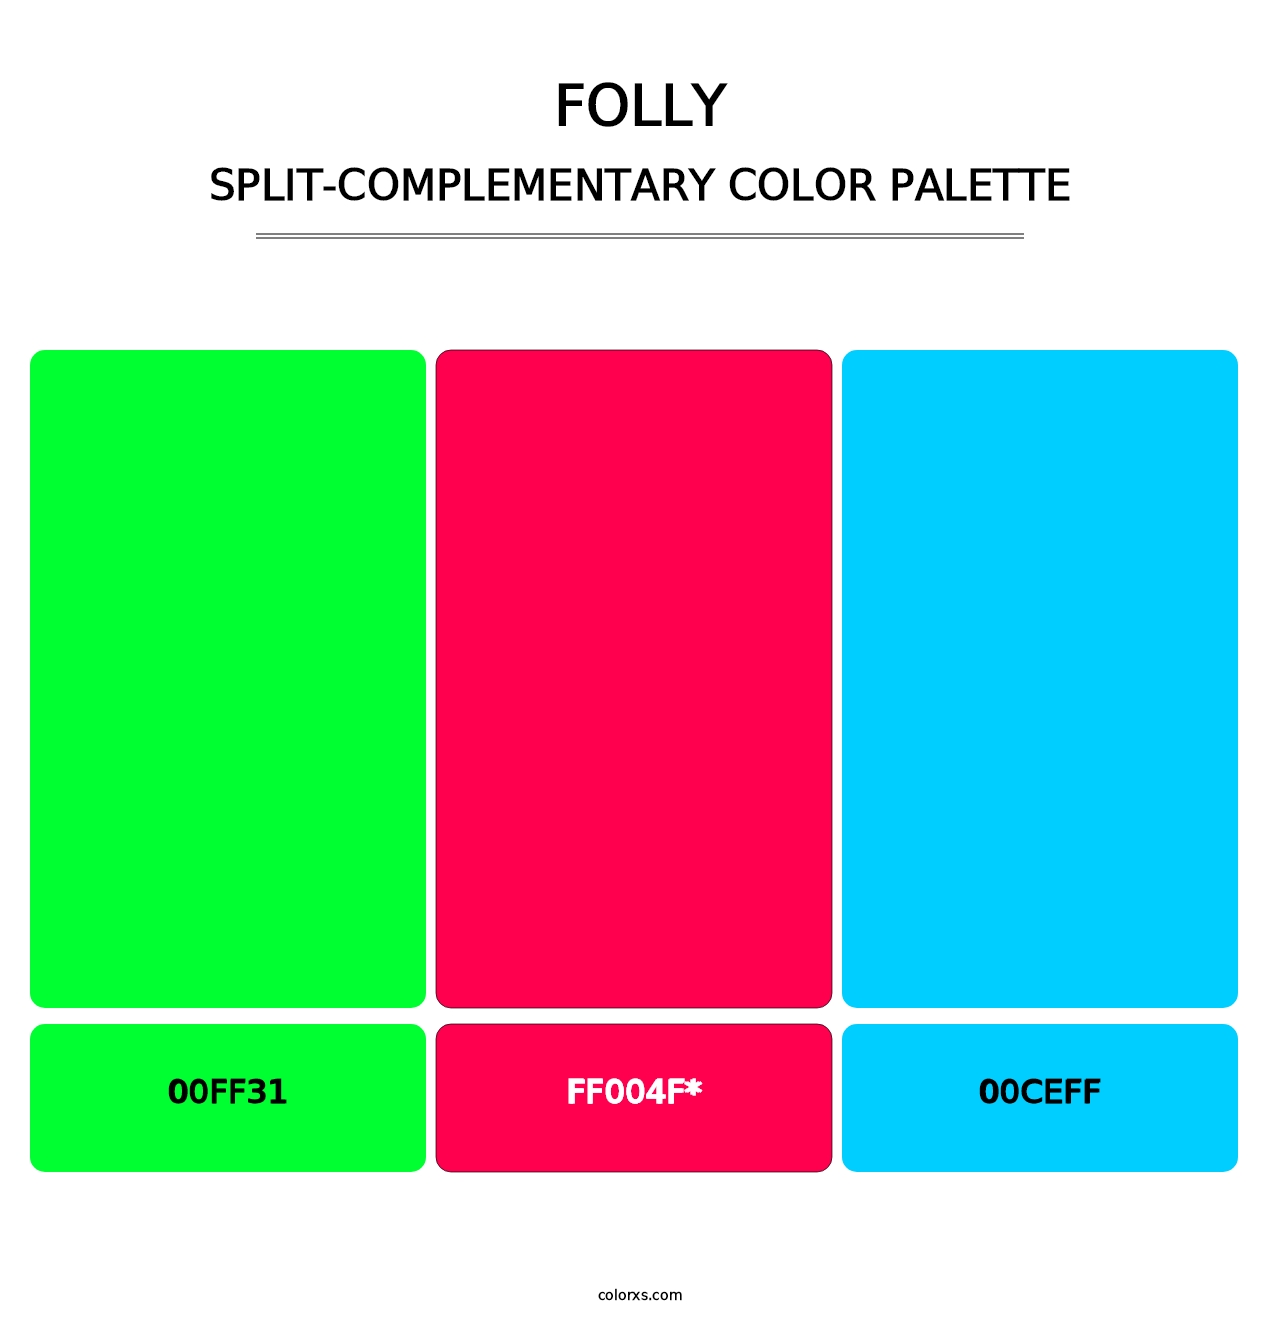 Folly - Split-Complementary Color Palette